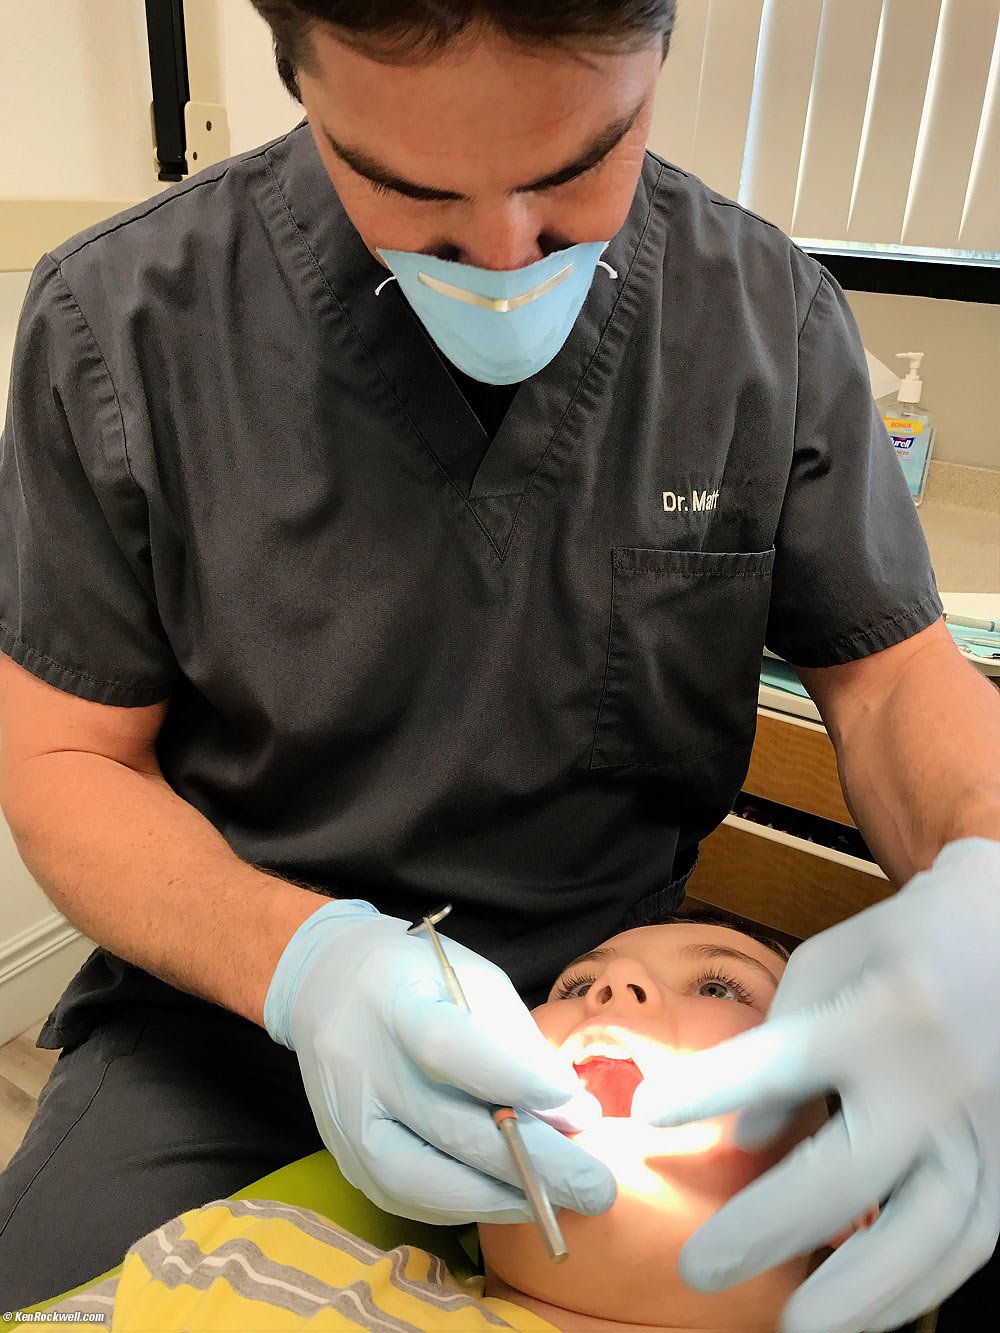 Ryan at the dentist's cleaned